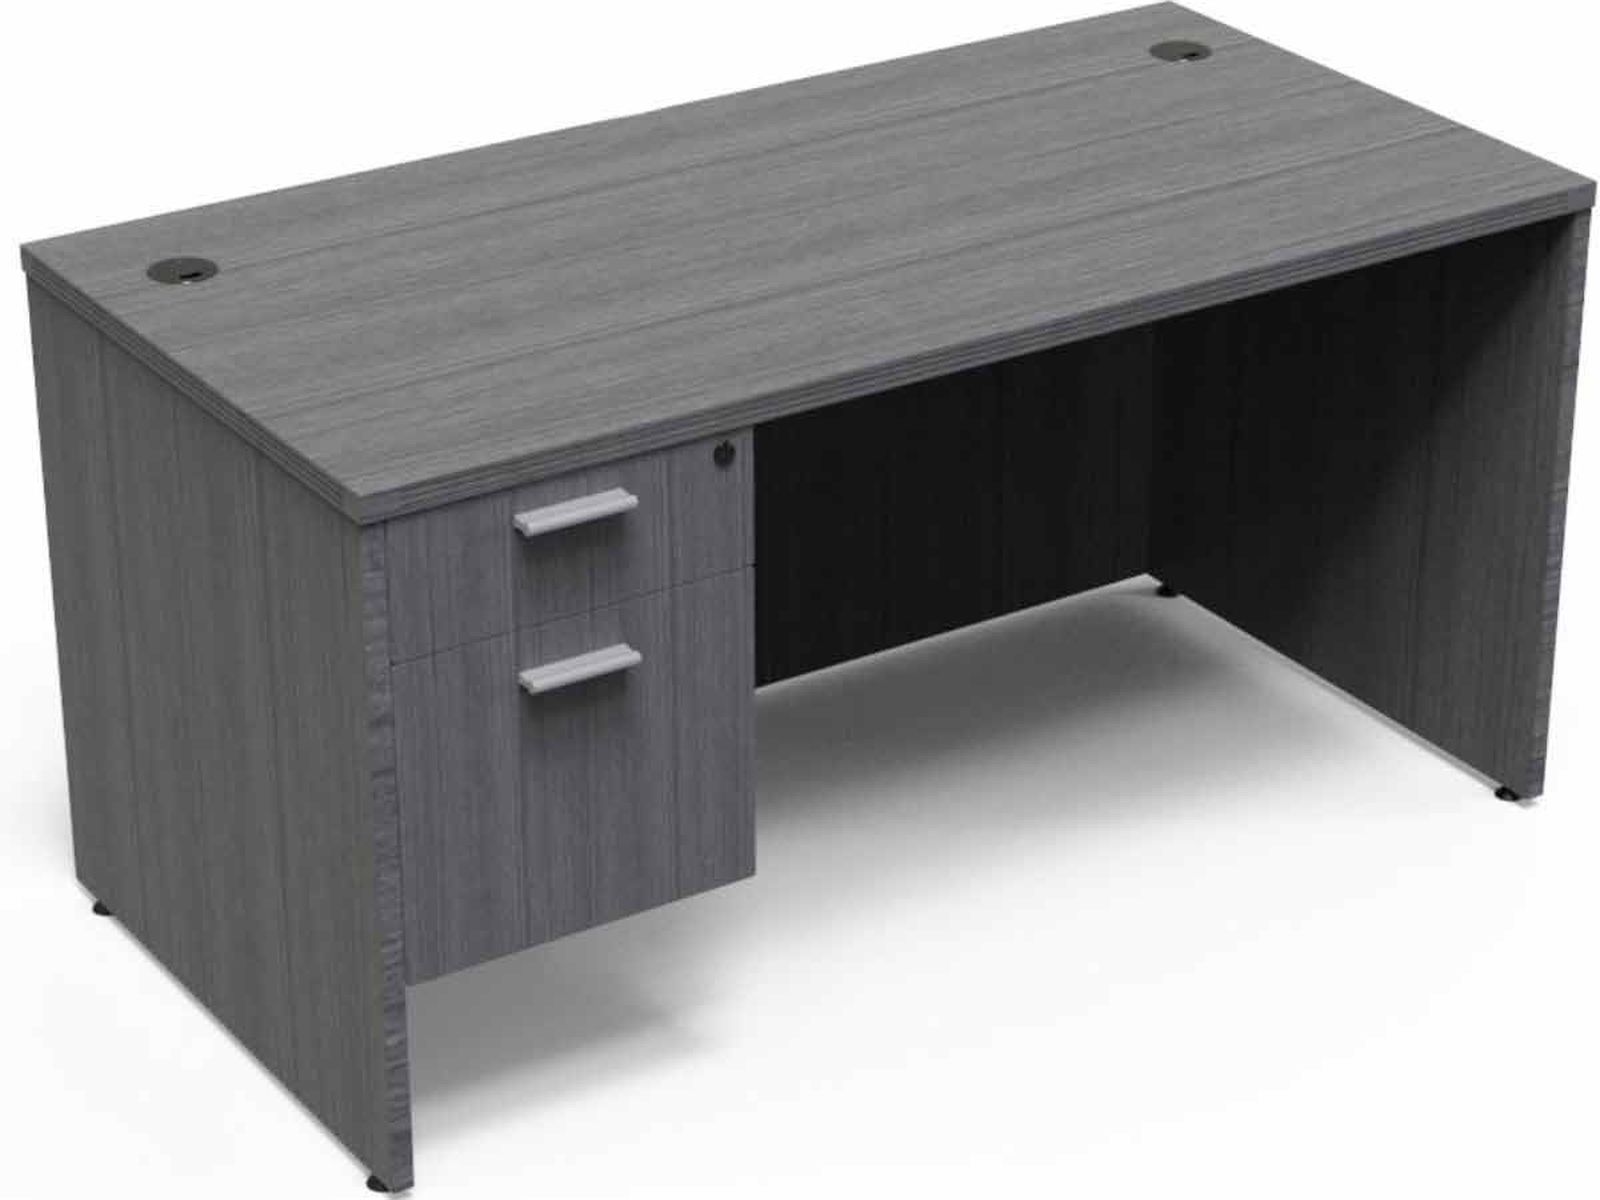 Kul desk table bookcases and files